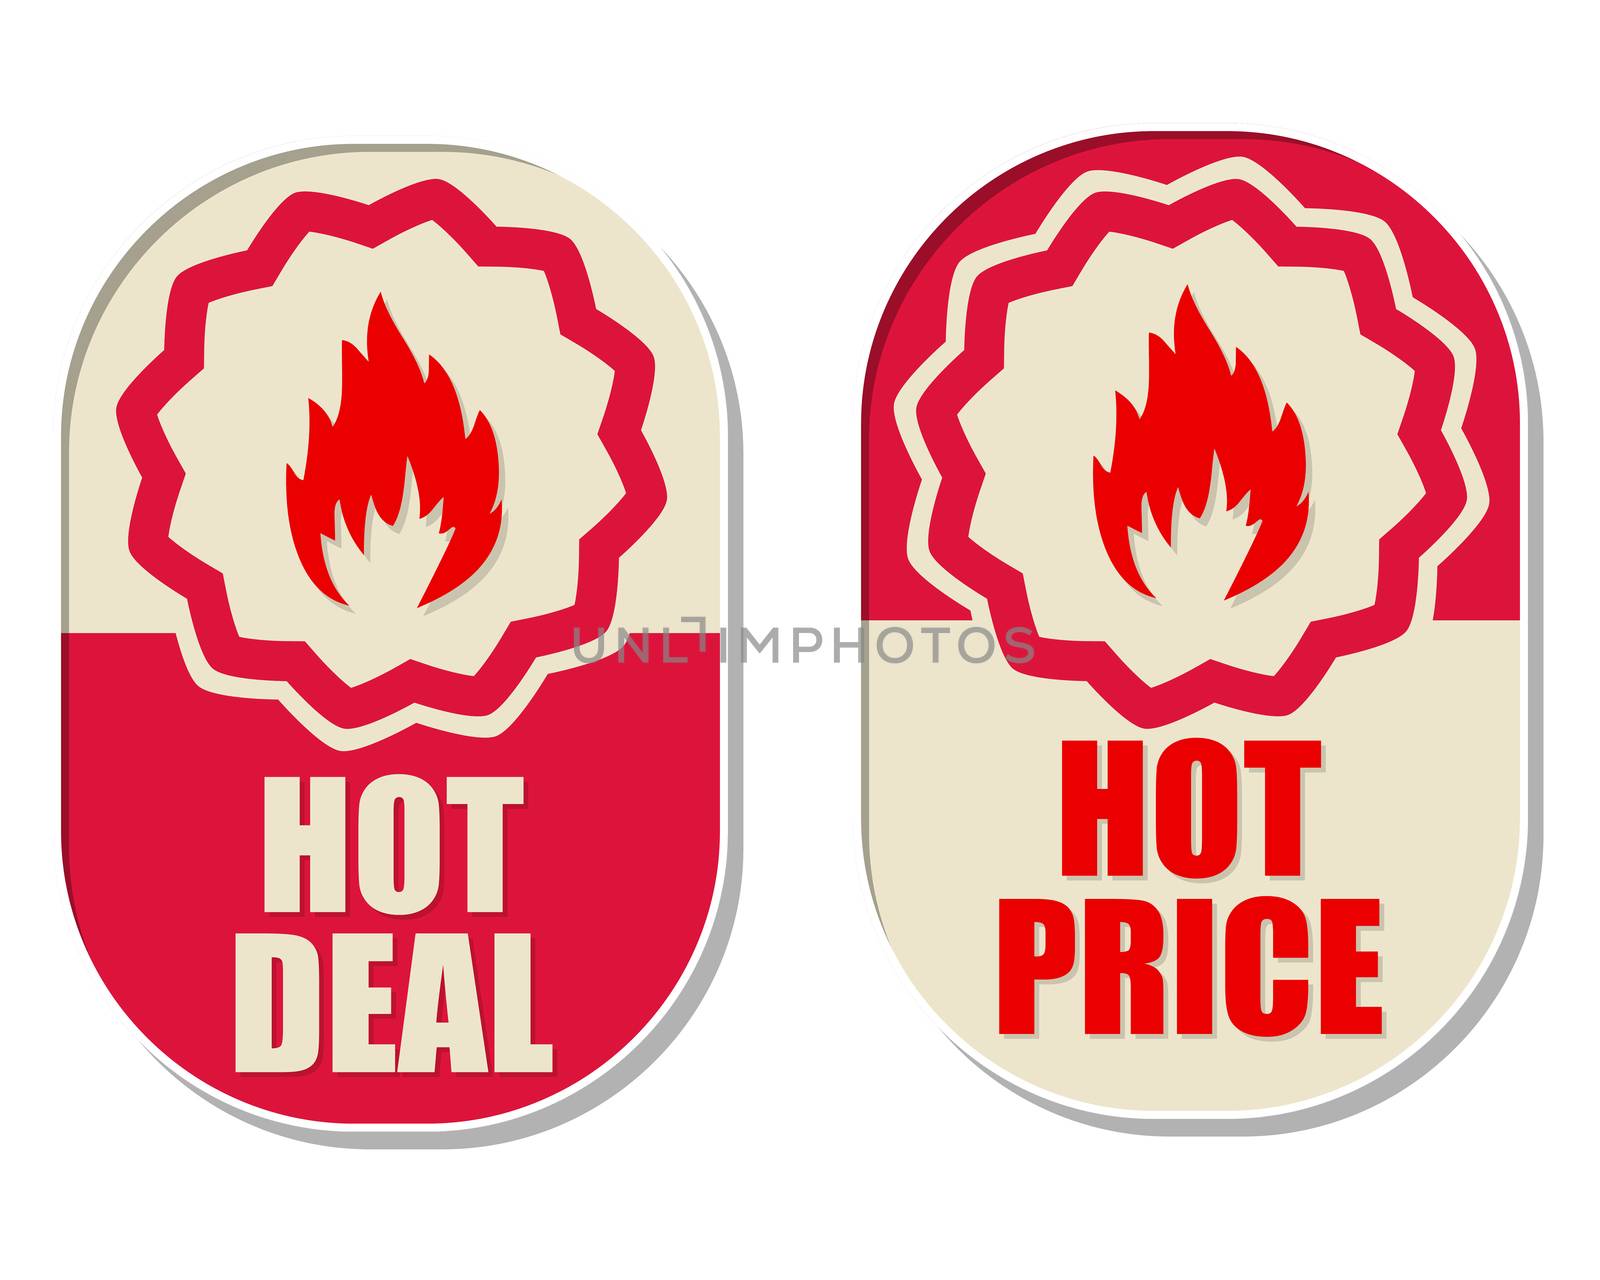 hot deal and hot price with flames signs, two elliptical labels by marinini